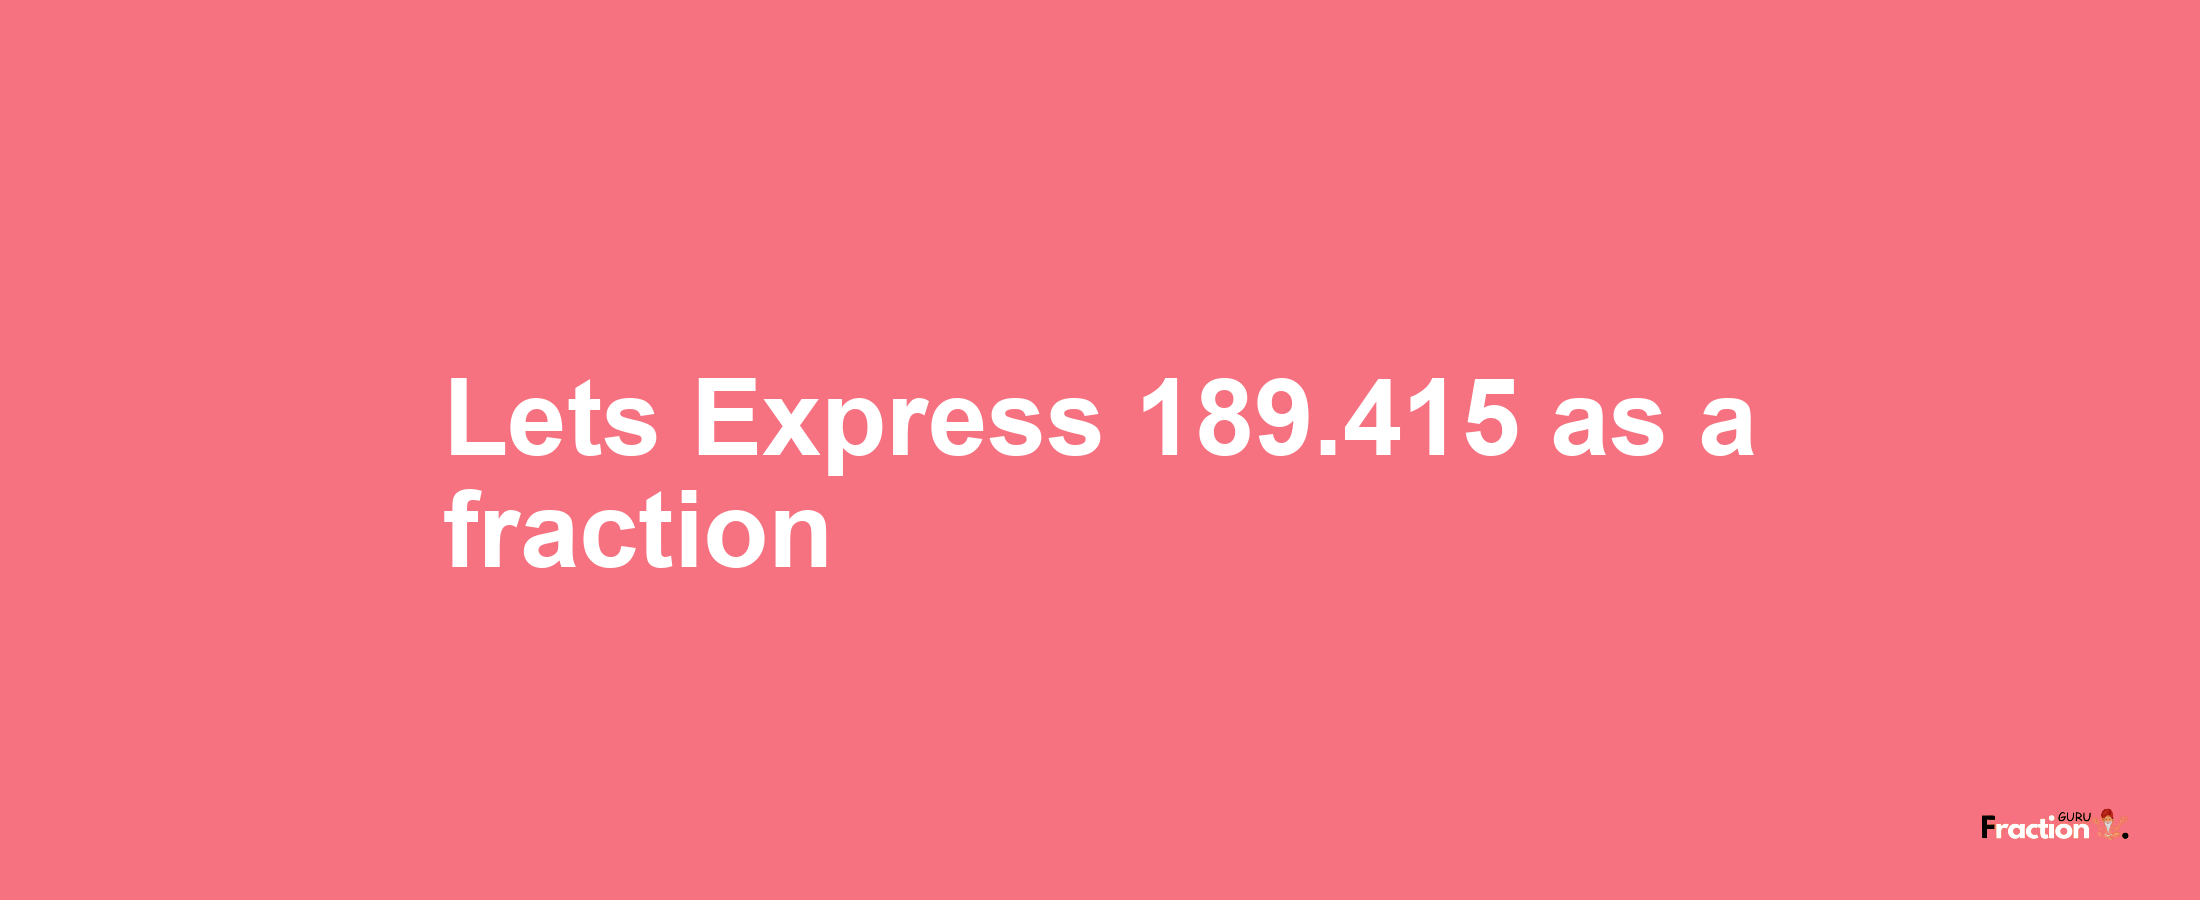 Lets Express 189.415 as afraction